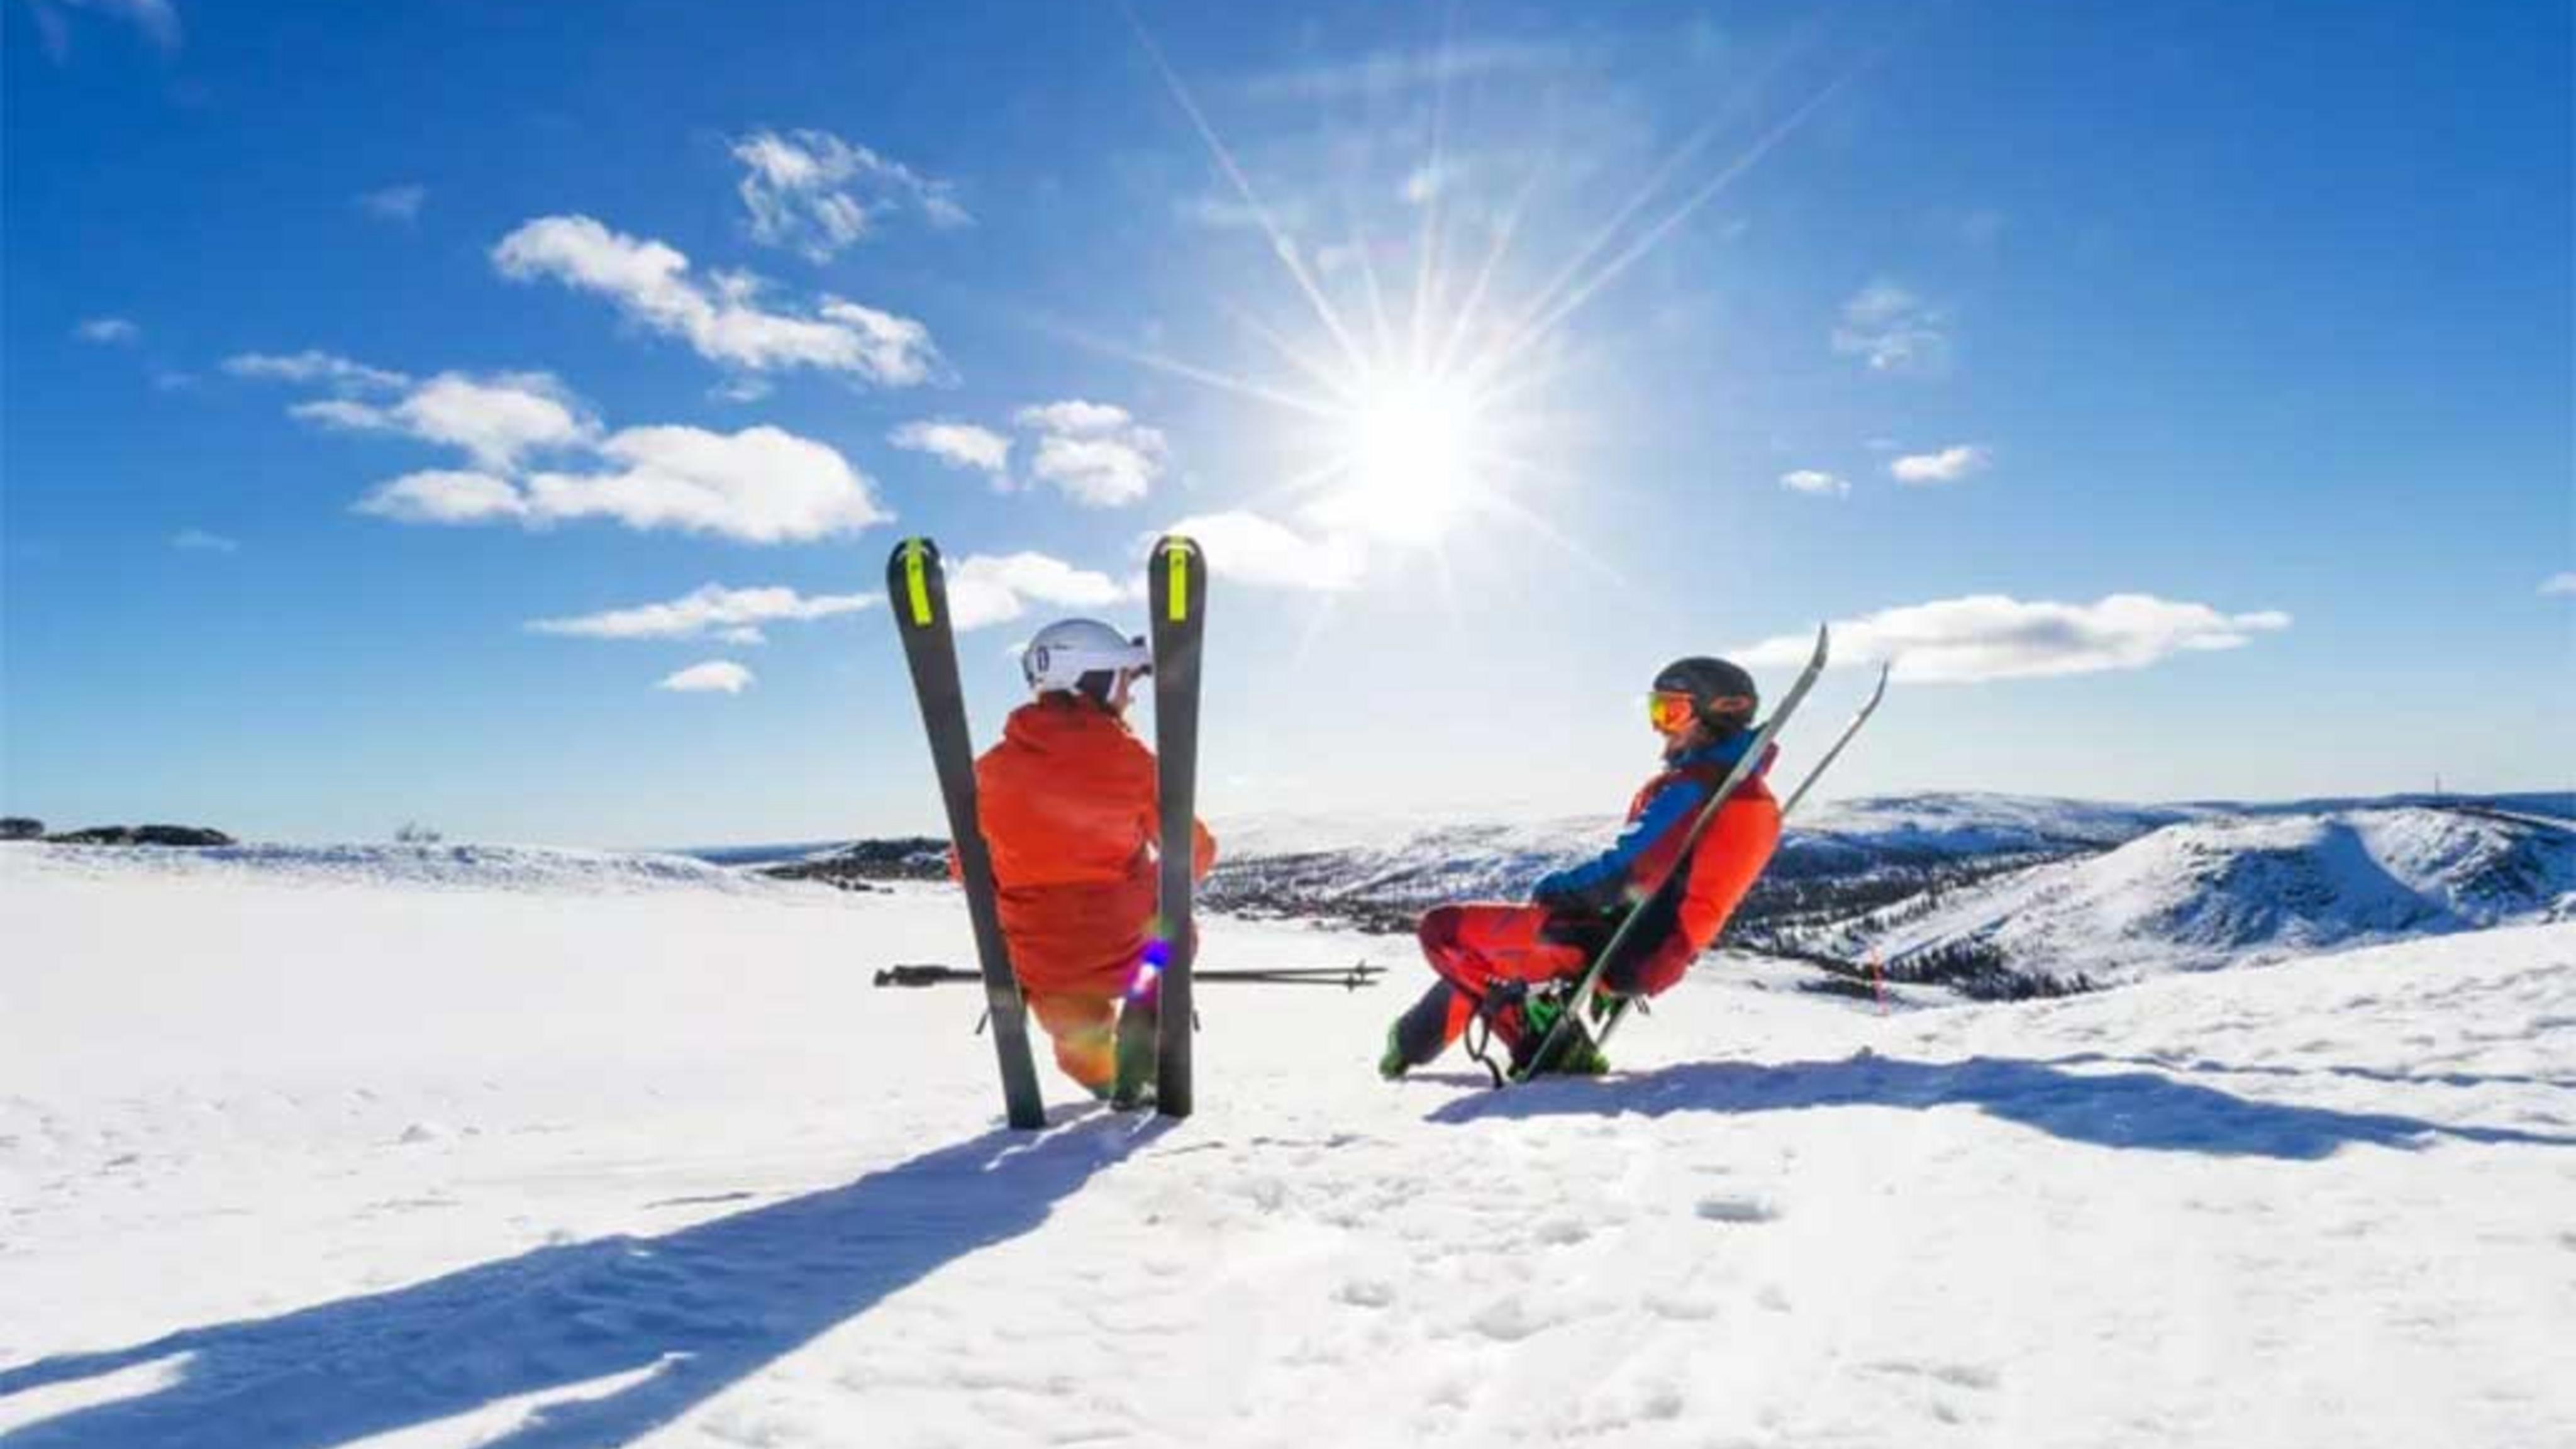 Low profit for Skistar – private business